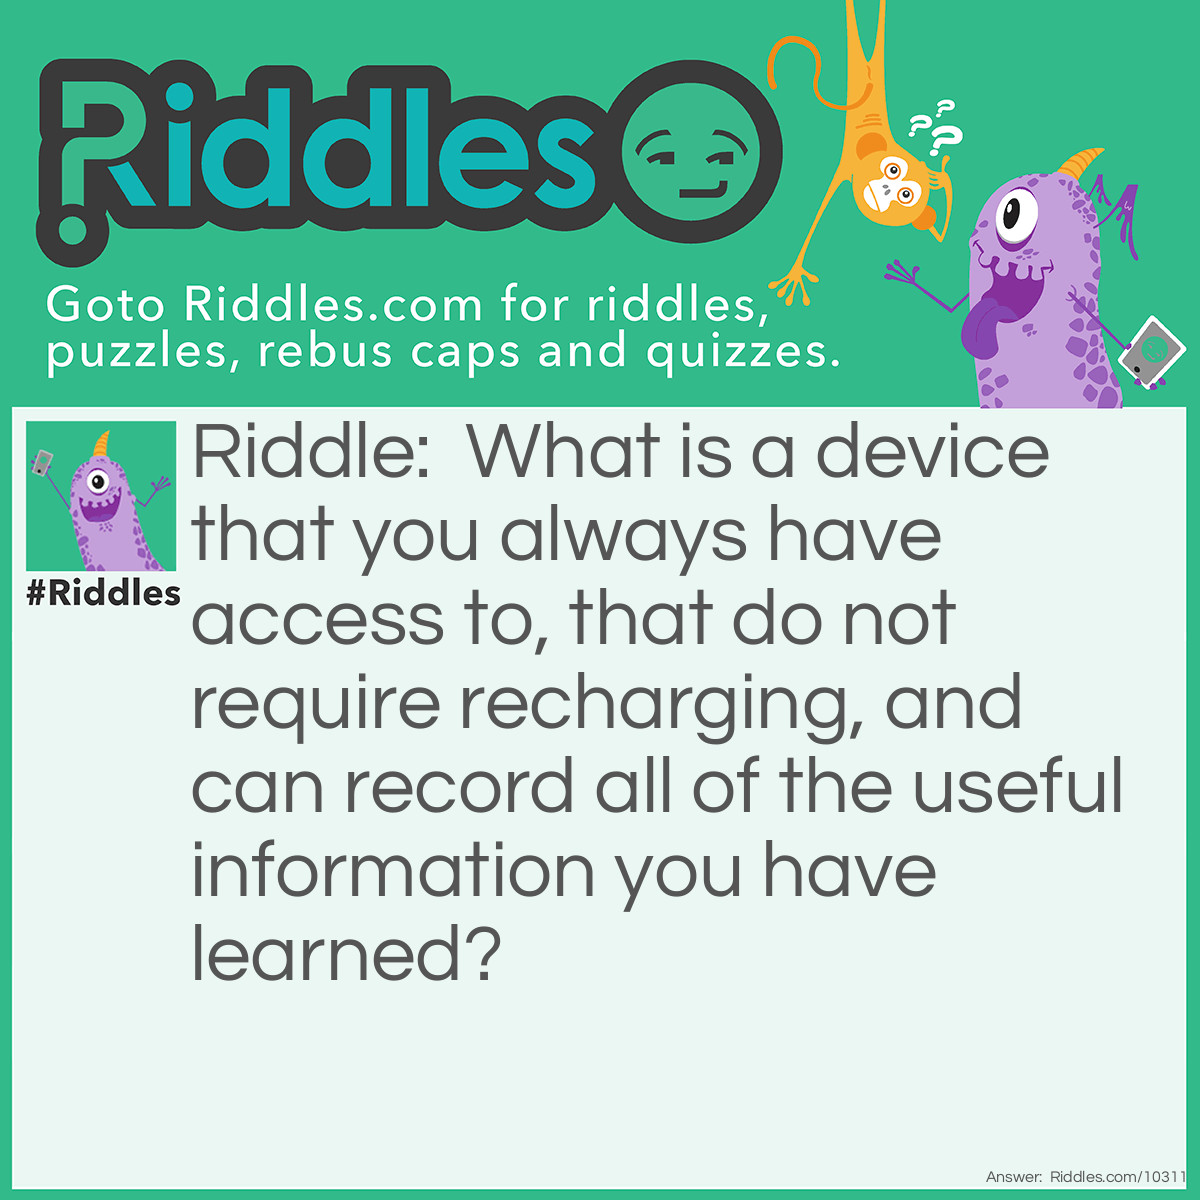 Riddle: What is a device that you always have access to, that do not require recharging, and can record all of the useful information you have learned? Answer: Your brain!